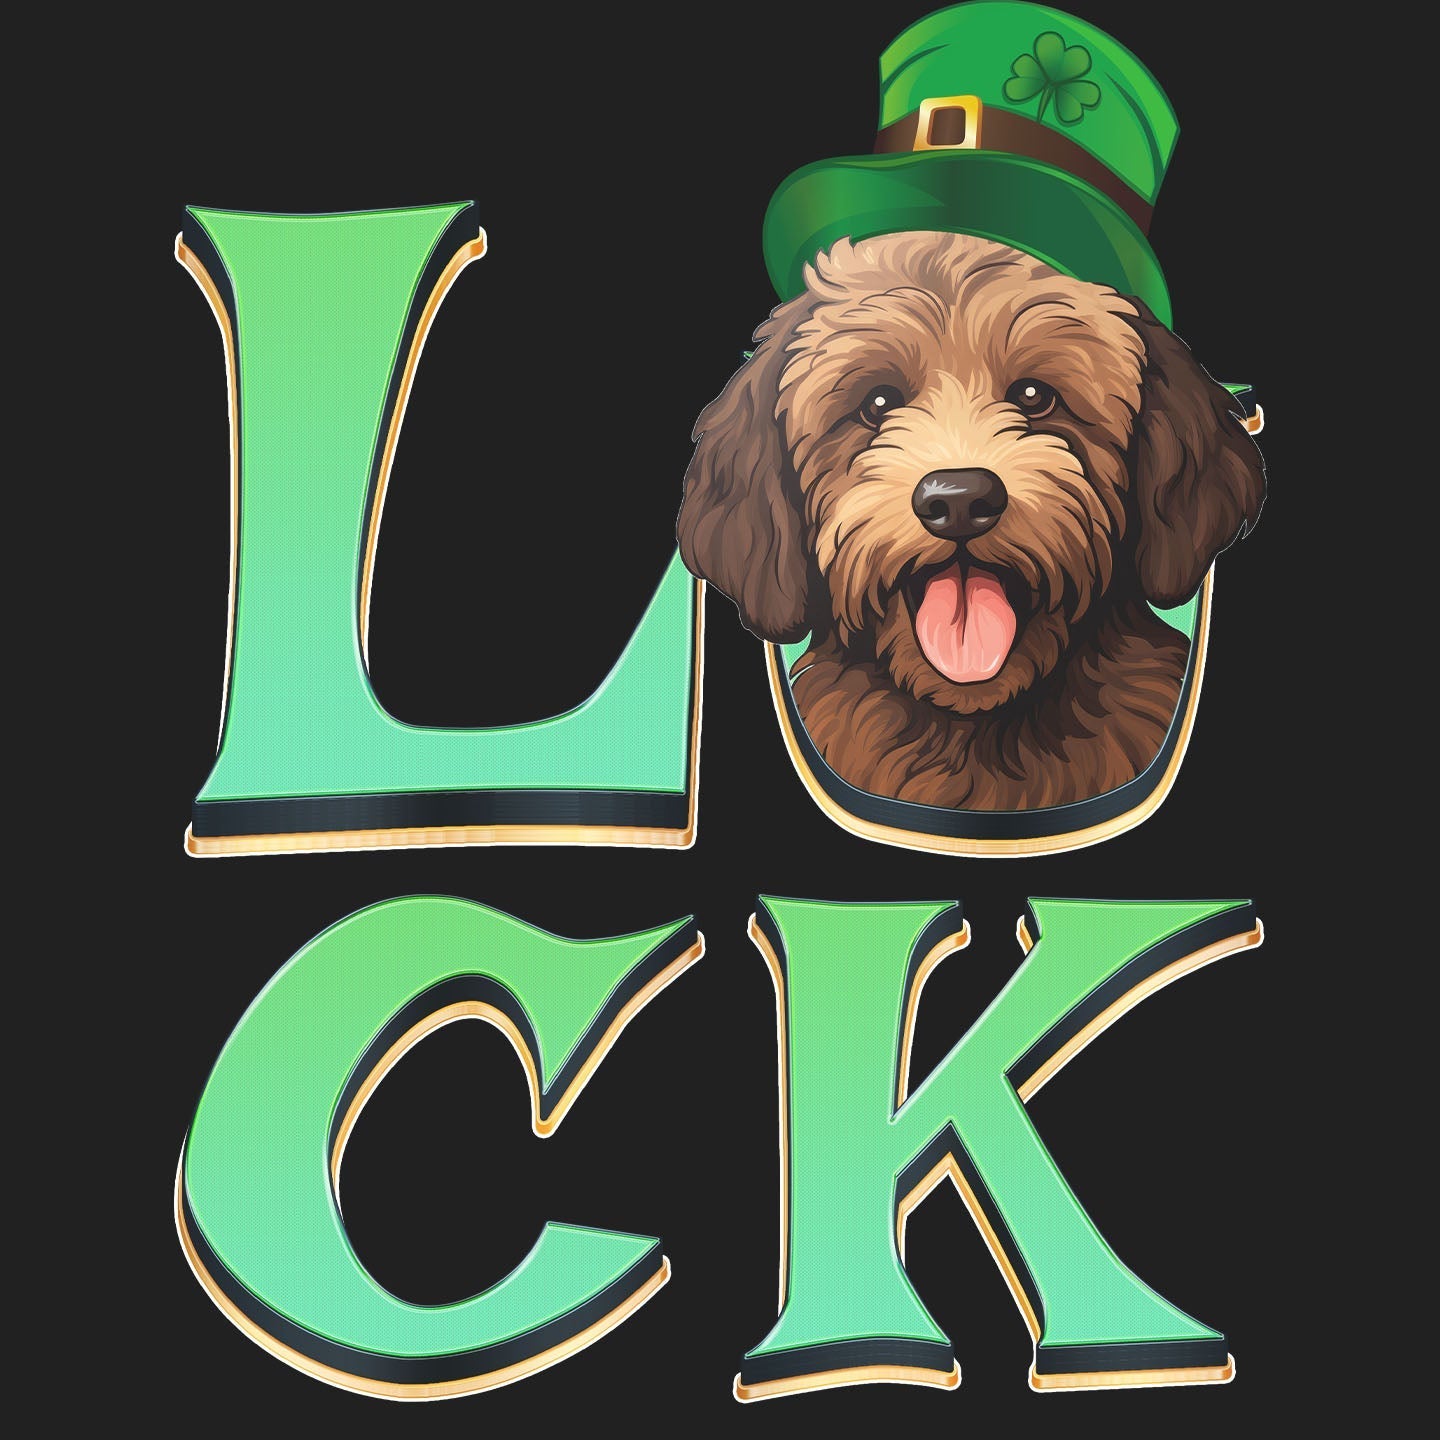 Big LUCK St. Patrick's Day Labradoodle (Chocolate) - Women's Fitted T-Shirt